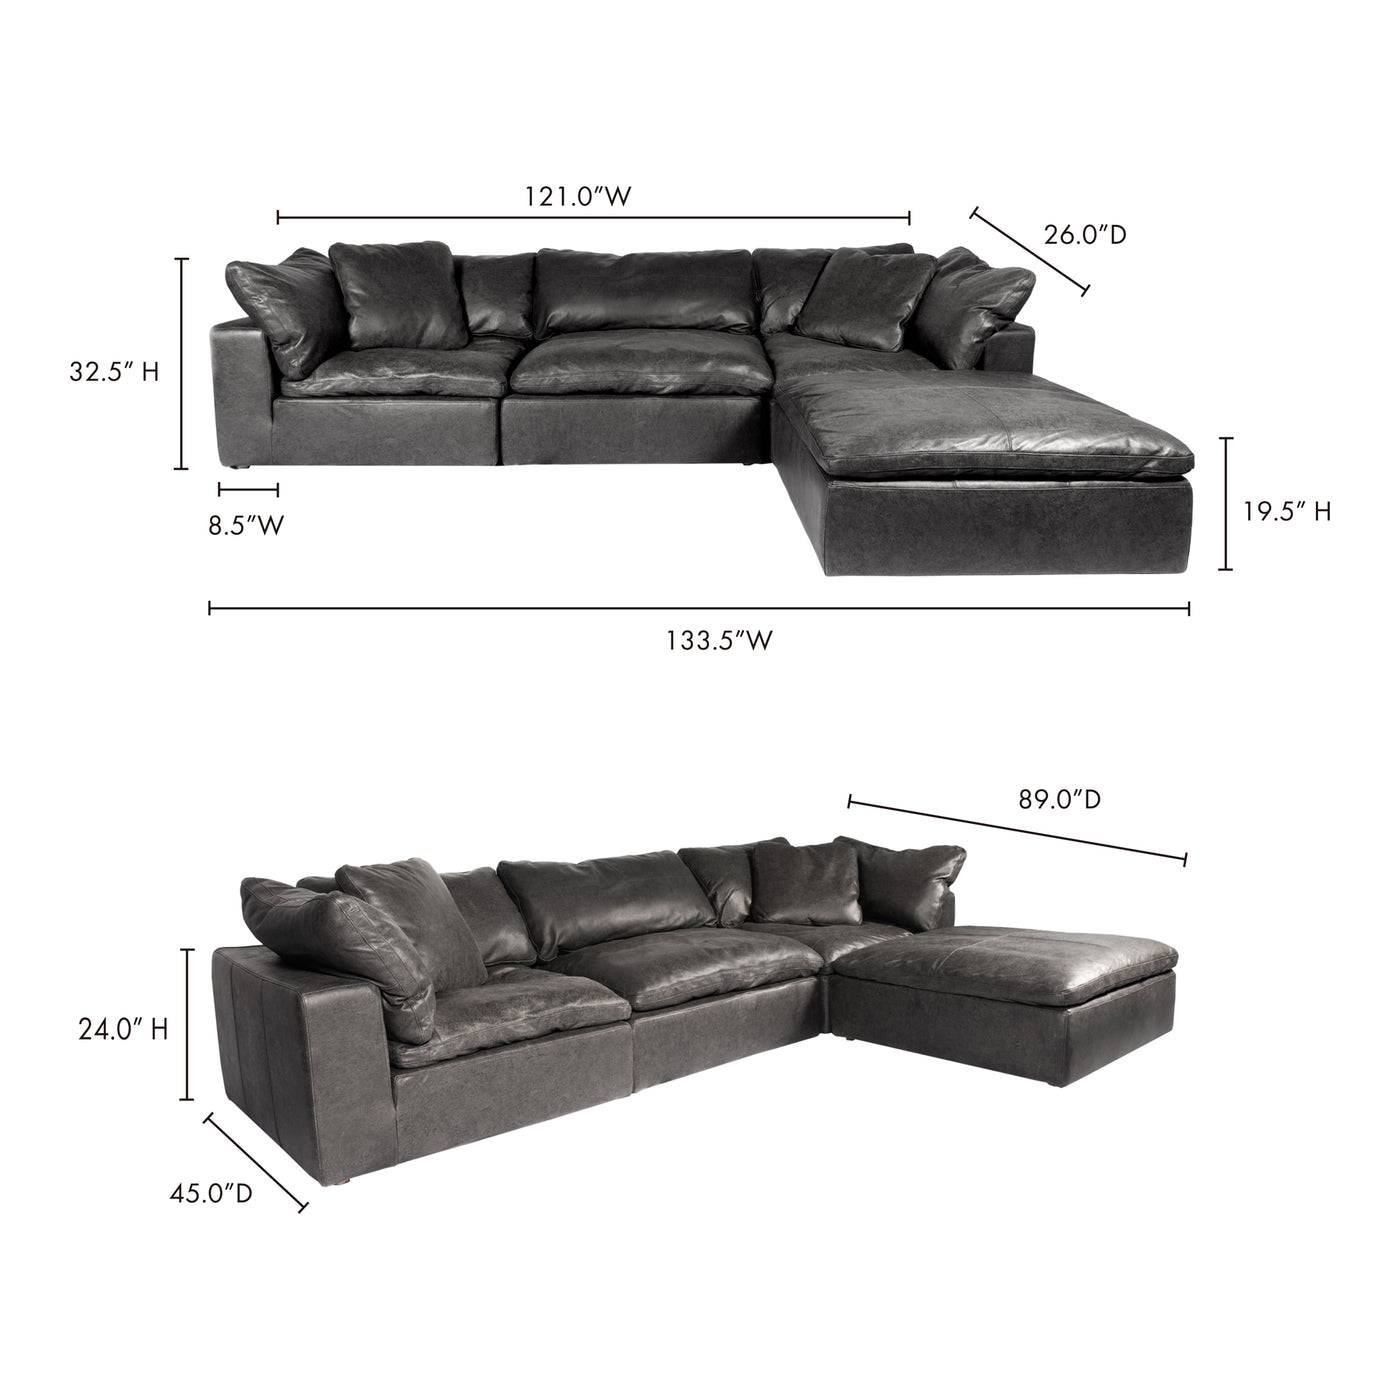 Our Clay Lounge Modular Sectional is upholstered with a soft, smooth, top-grain nubuck leather. Its cushions are filled ge...